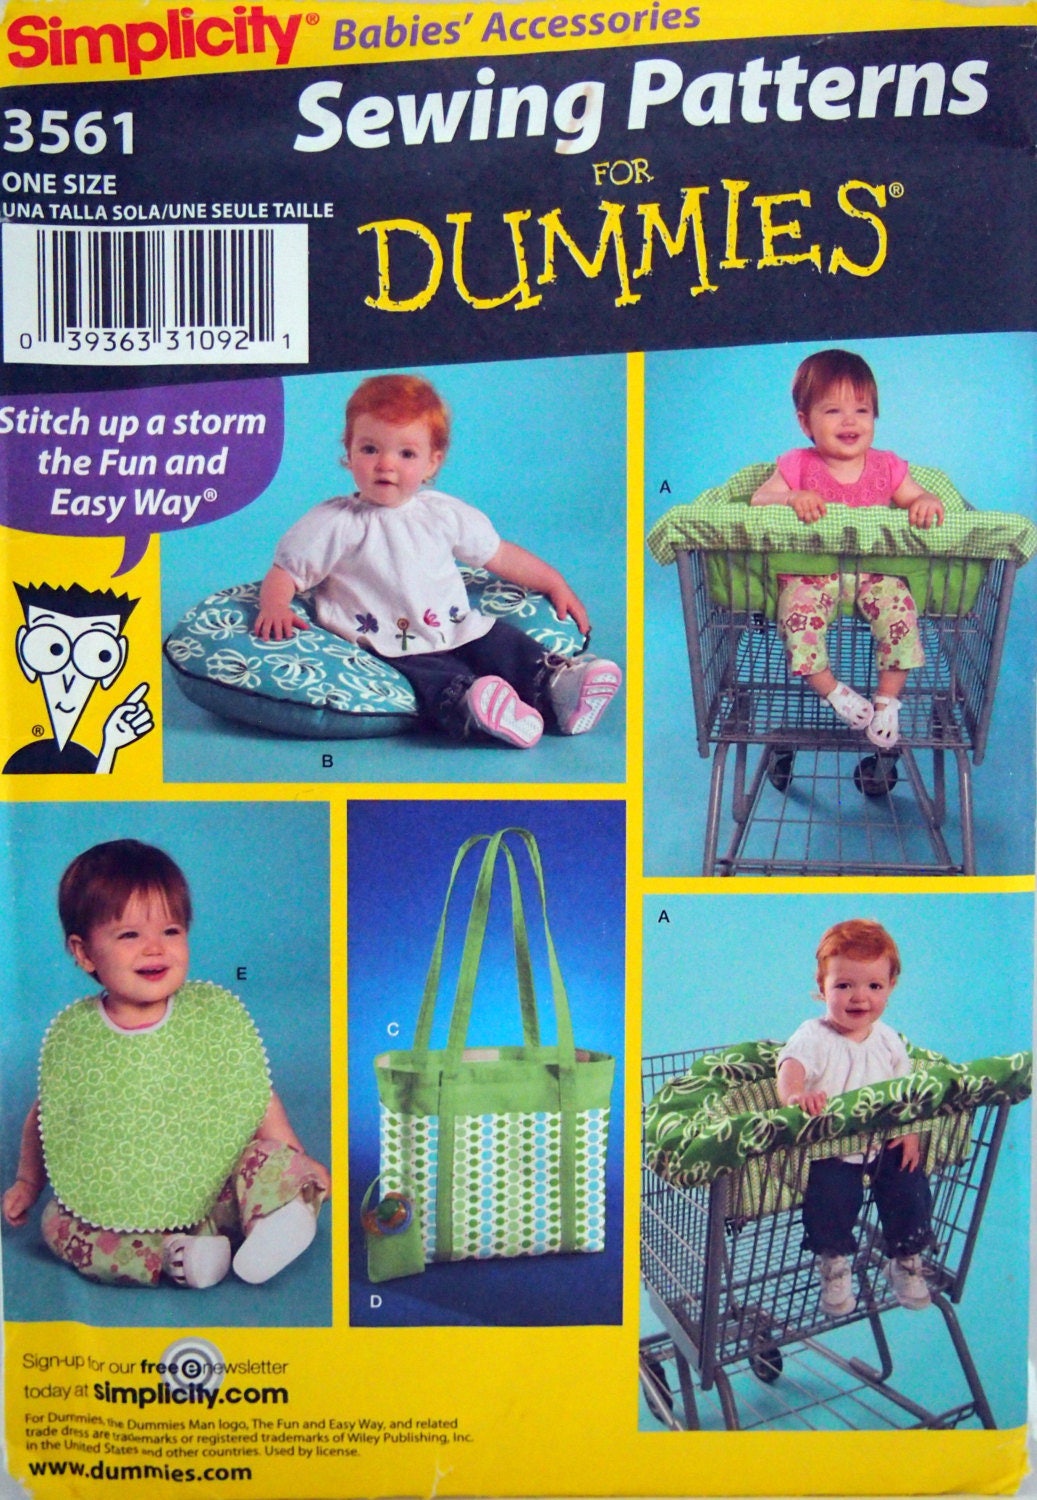 Babies' Accessories Sewing Patterns For Dummies Simplicity | Etsy